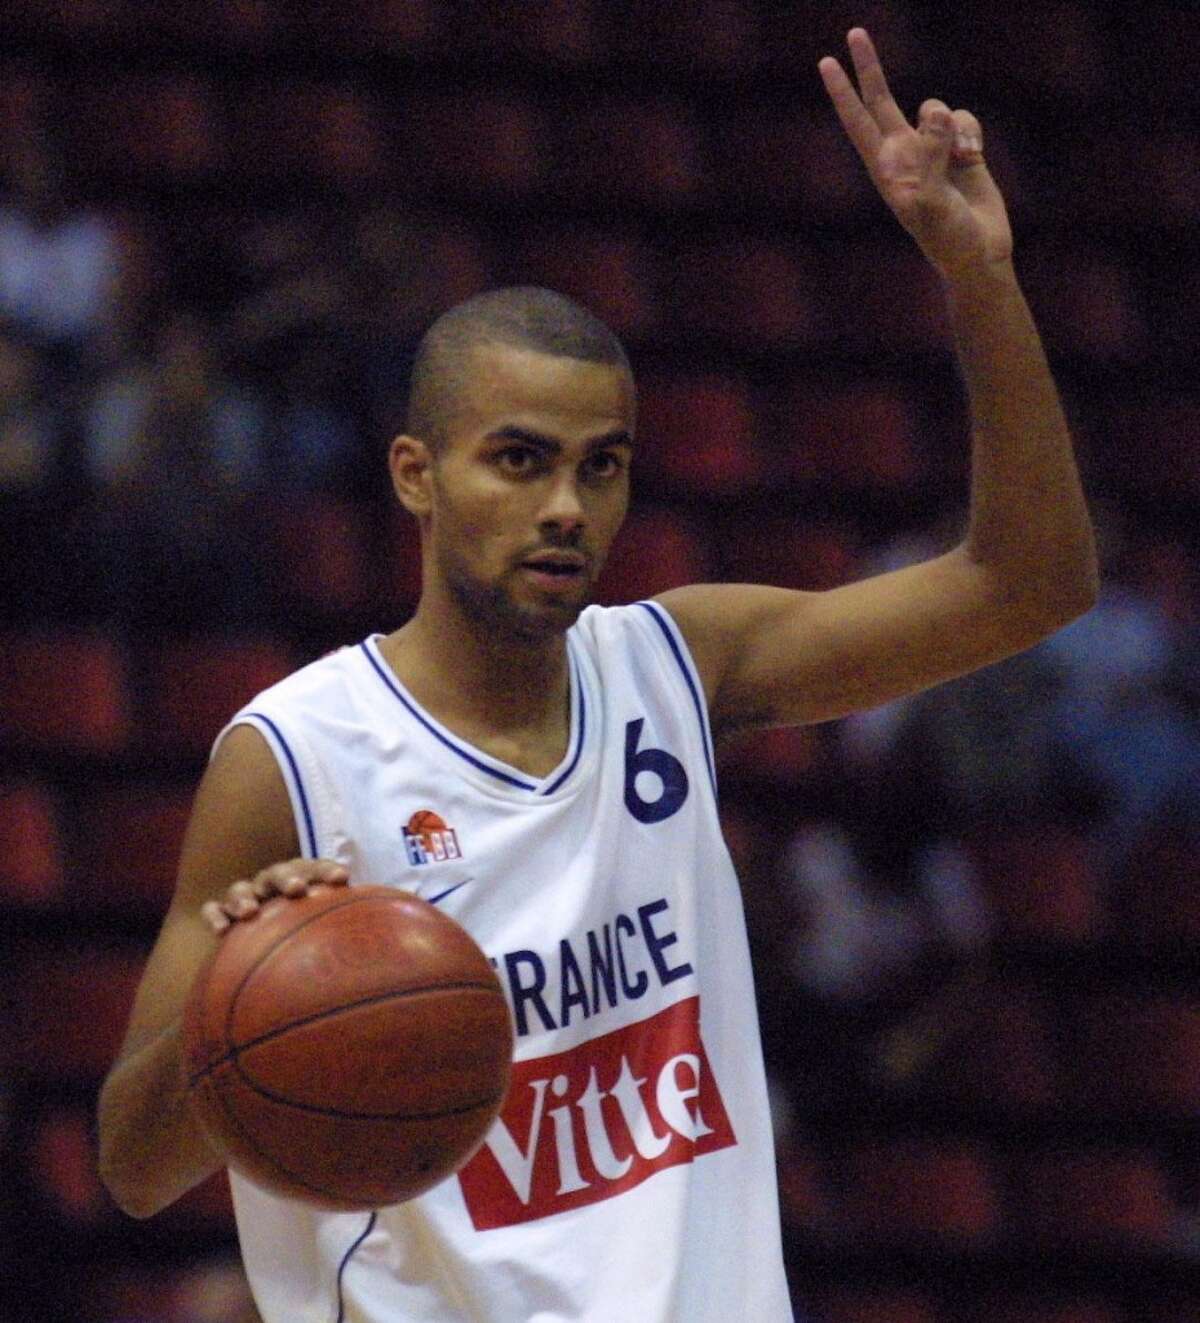 2. Before being drafted by the Spurs, Parker played in the French basketball league for two years.